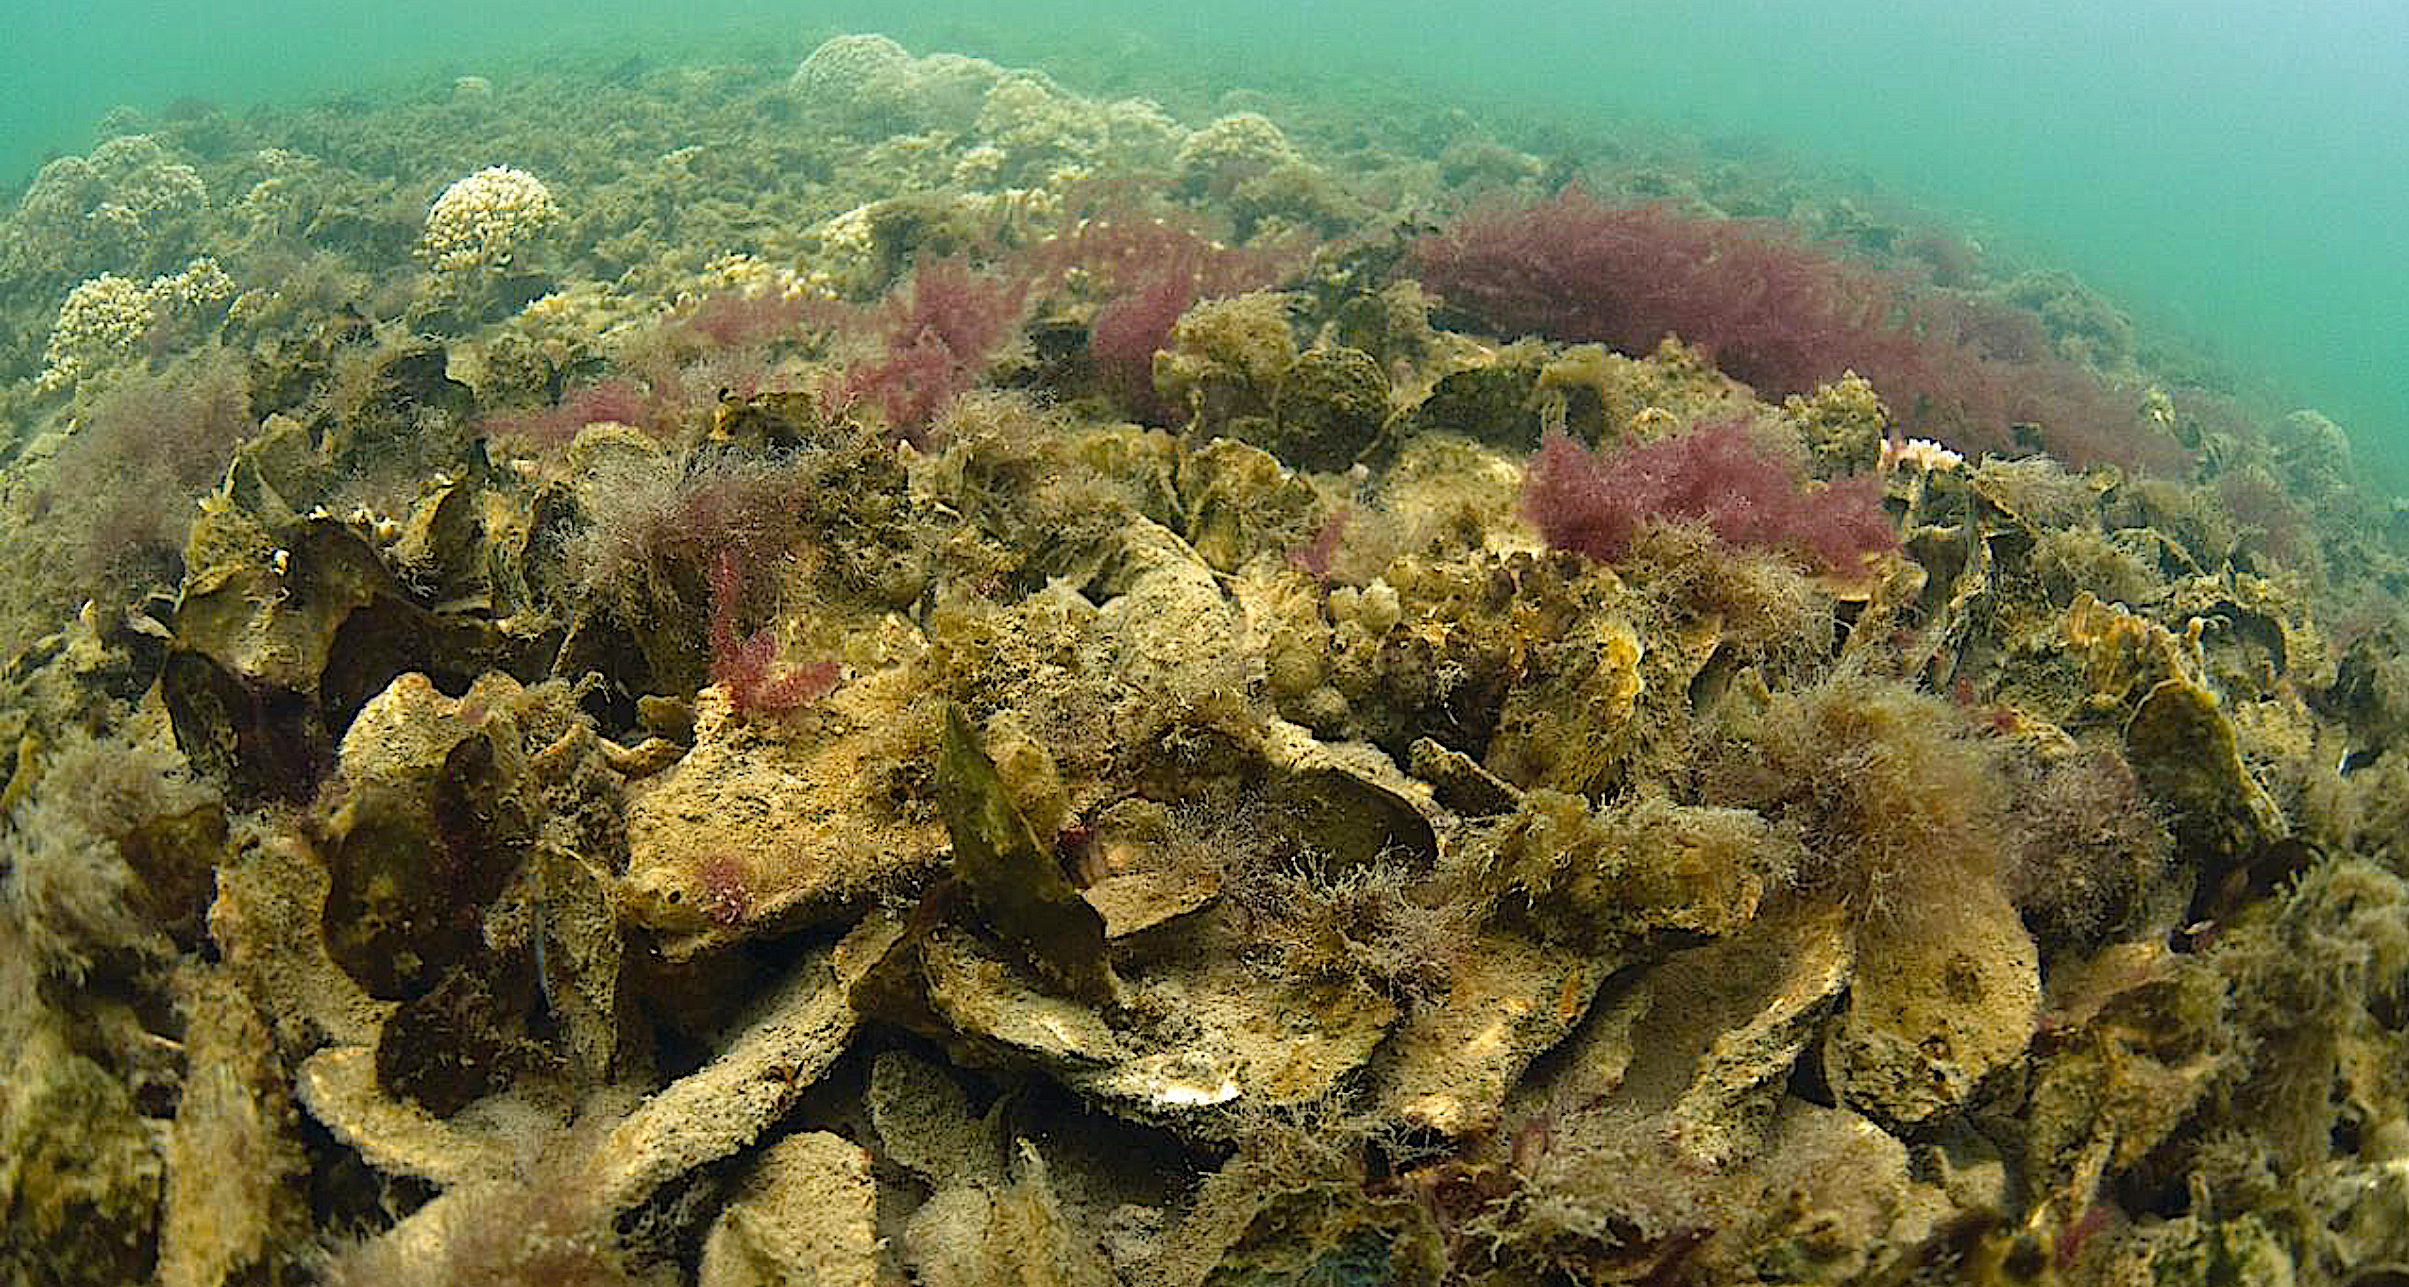 image: oyster reef. credit: NOAA.